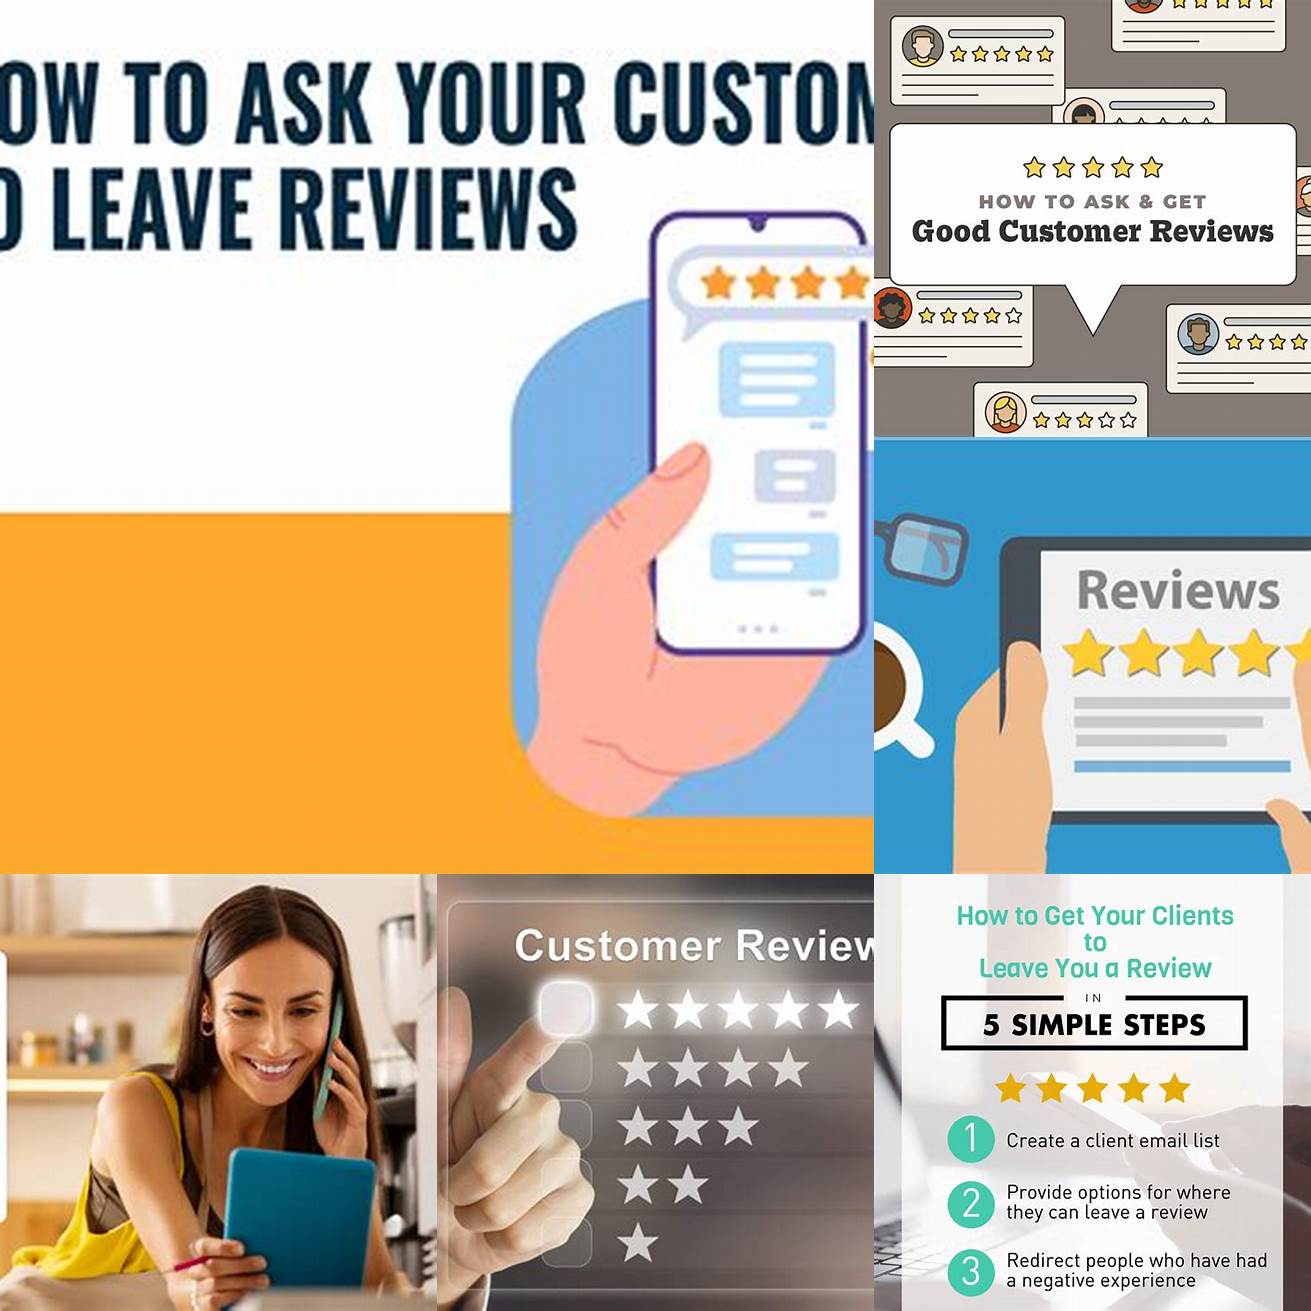 4 Customer Reviews Overstock allows customers to leave reviews on their products which can provide valuable insight when making a purchase